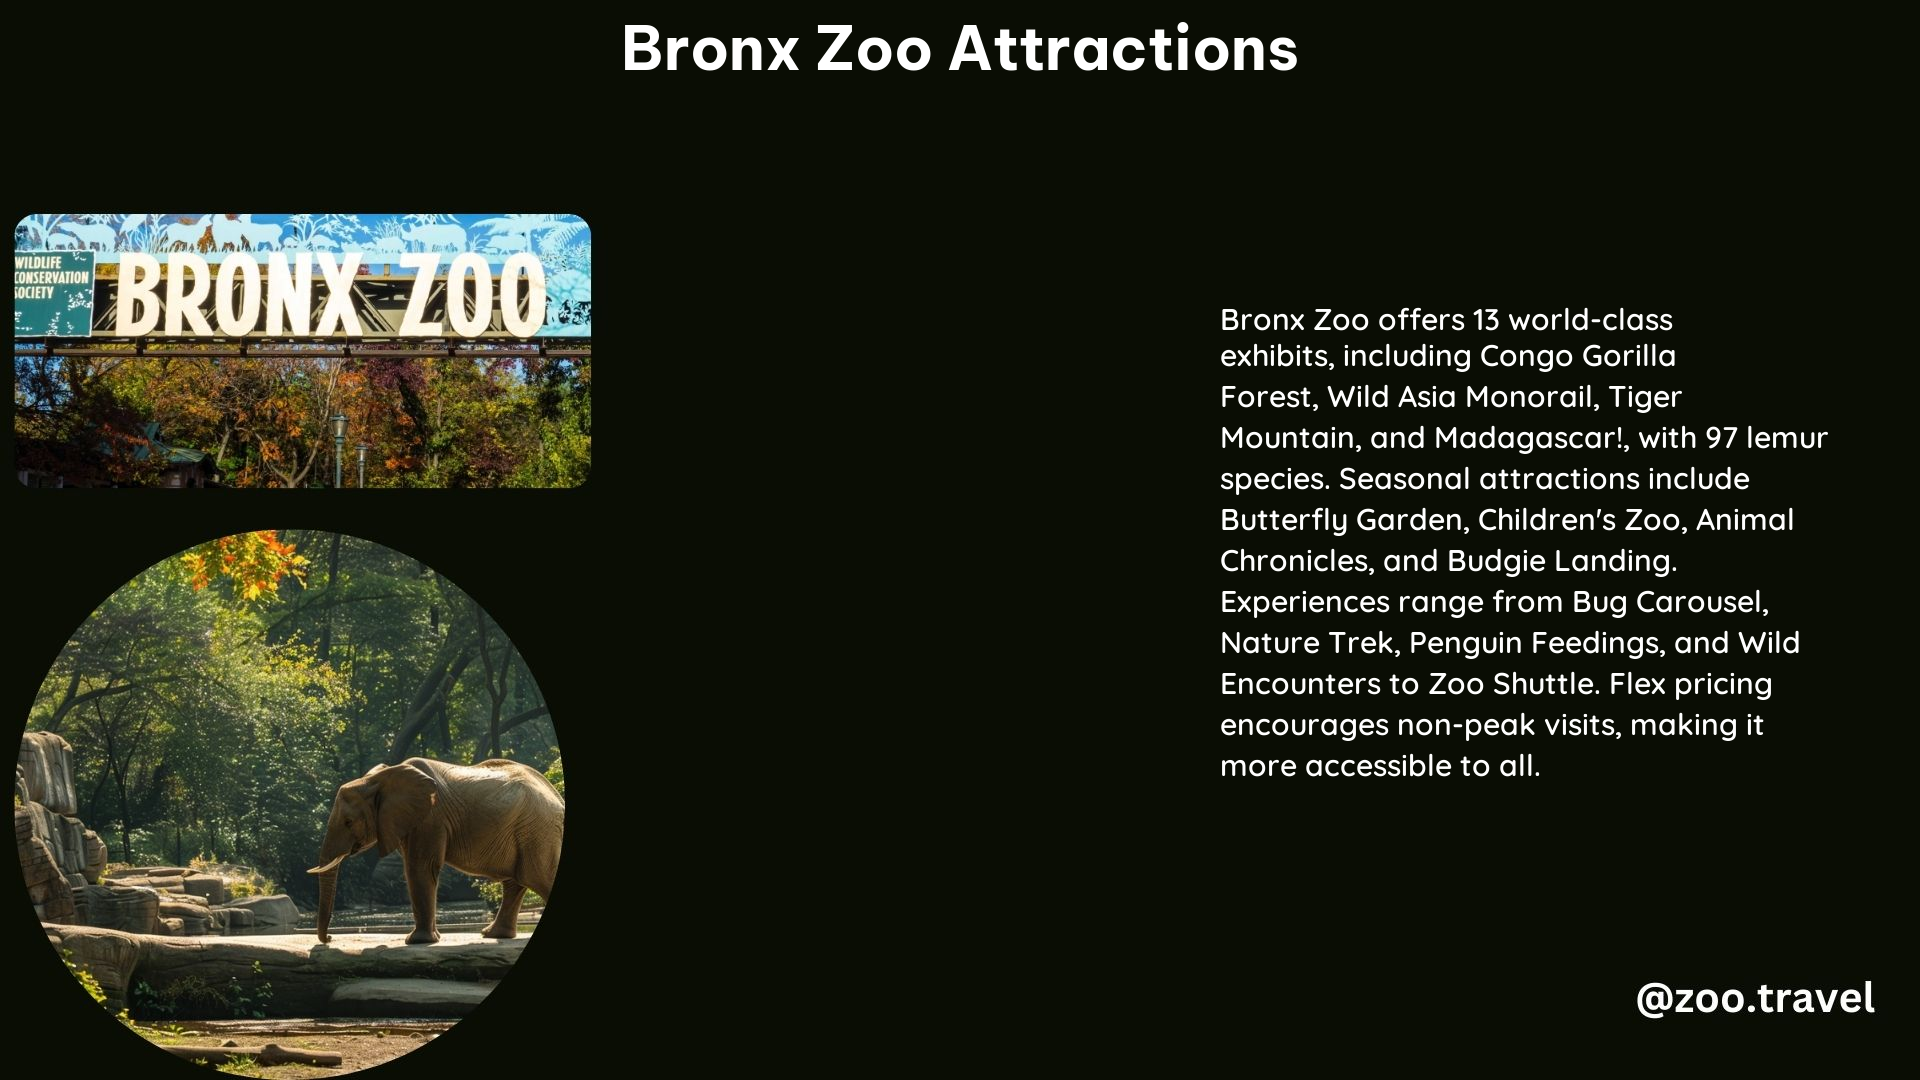 Bronx Zoo Attractions